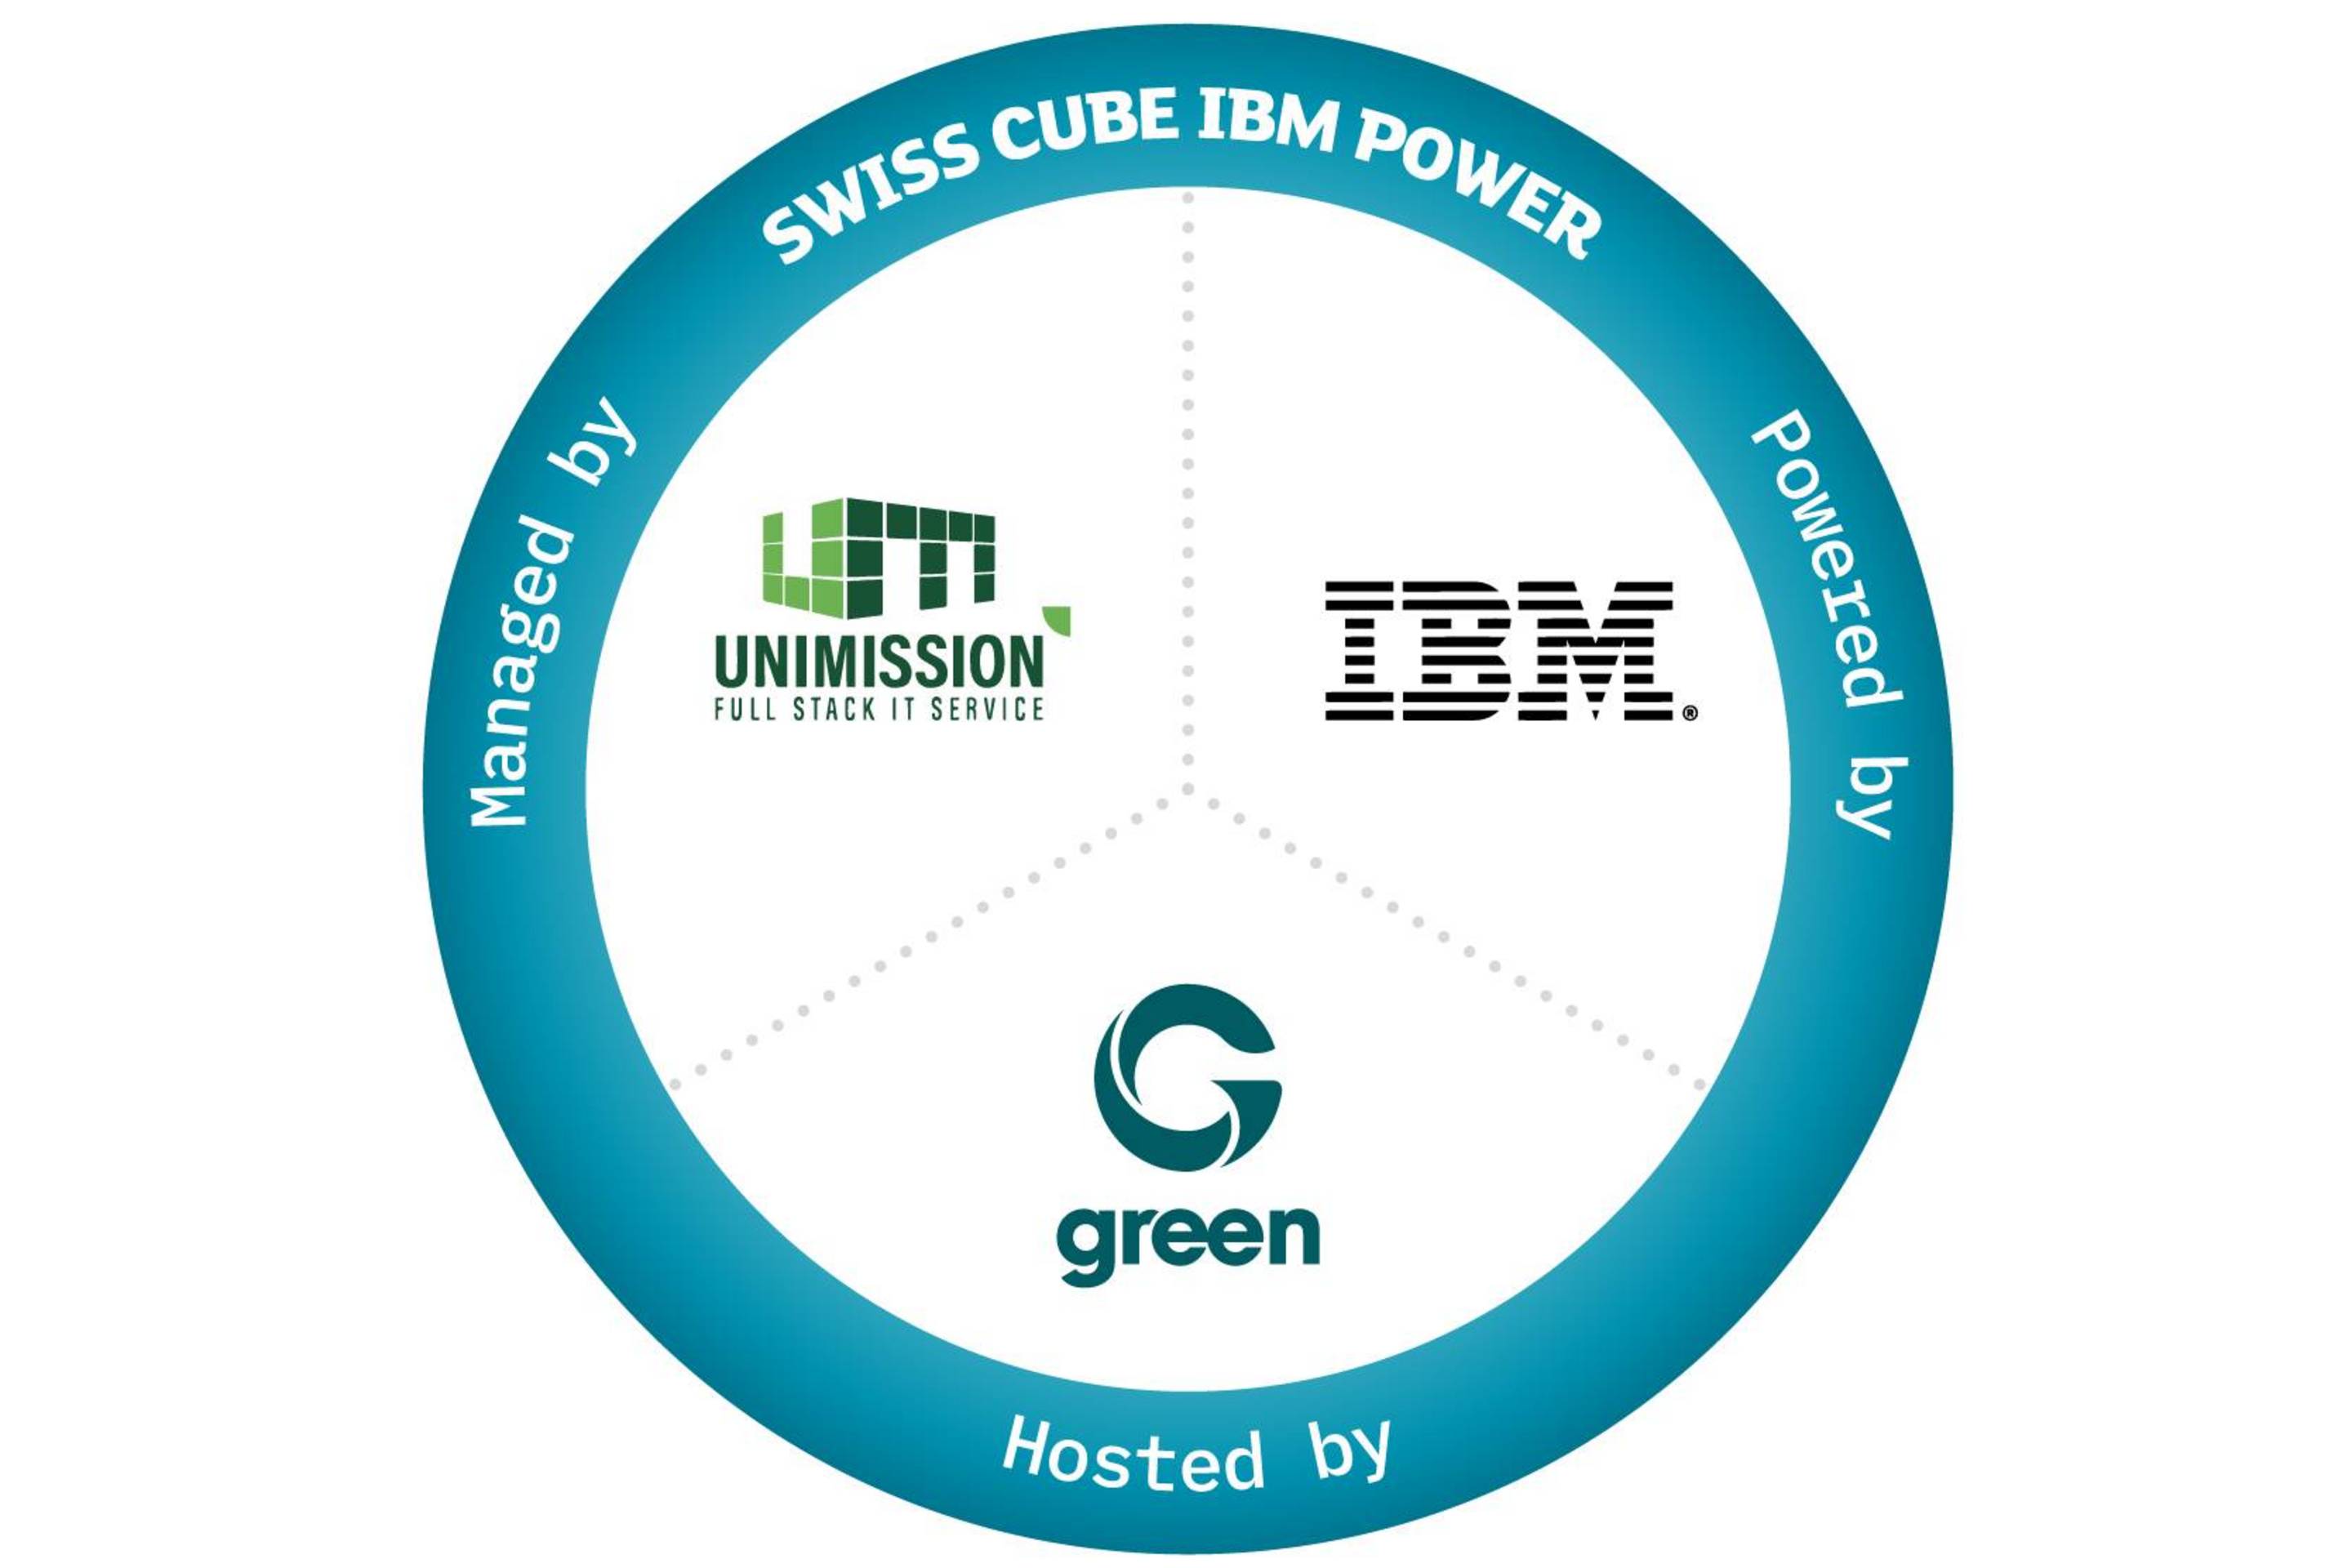 wiss Cube IBM Power graphic: managed by Unimission, powered by IBM Power, hosted by Green